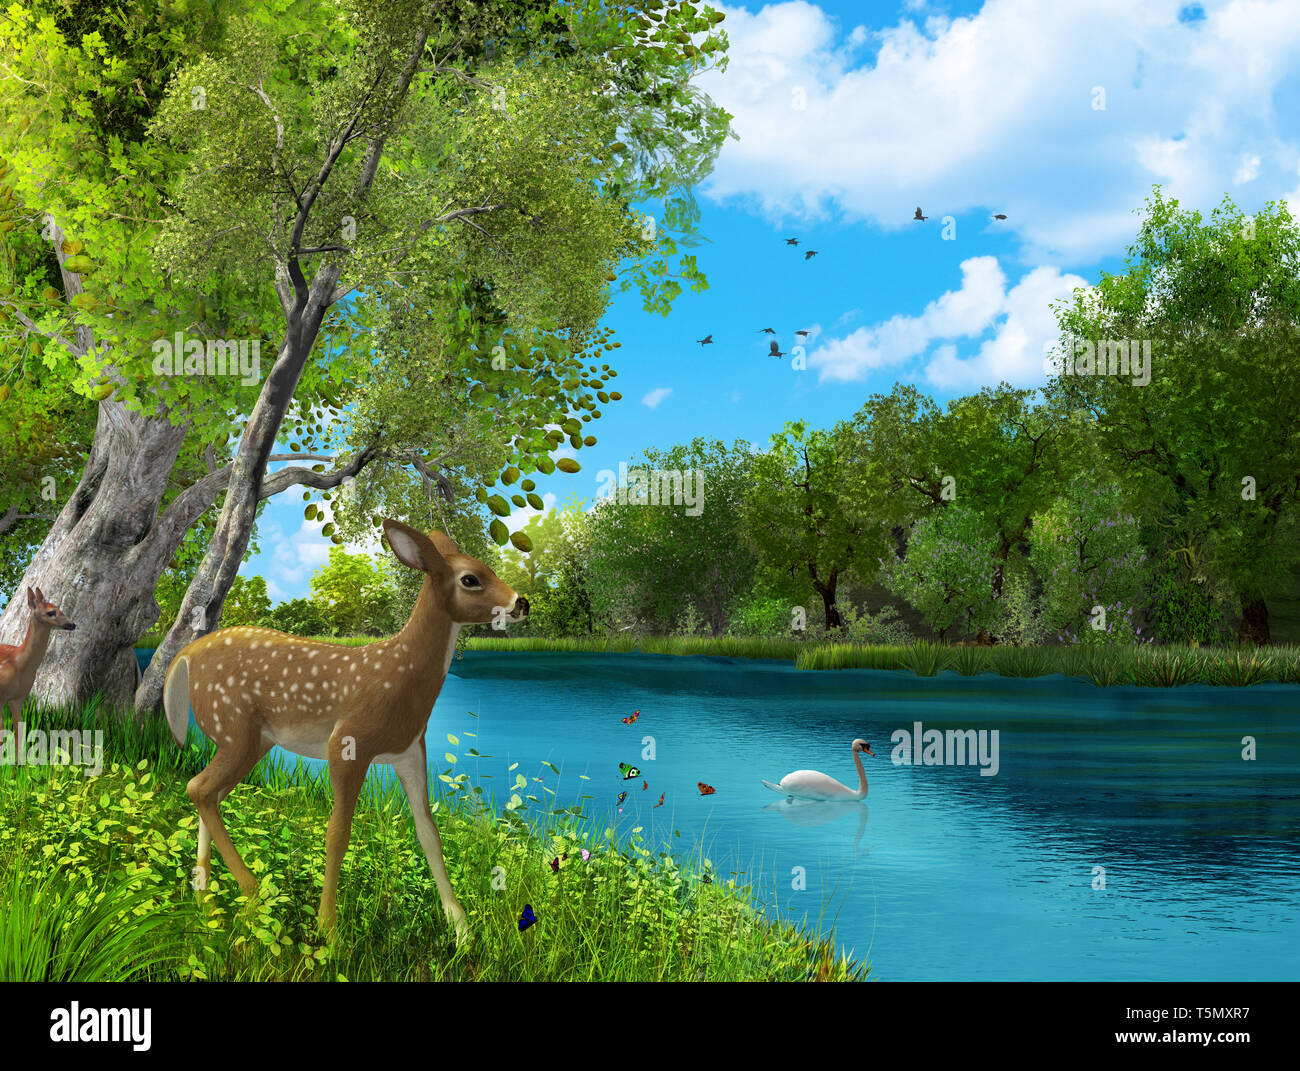 Beautiful untouched animal nature paradies, peaceful, Garden of